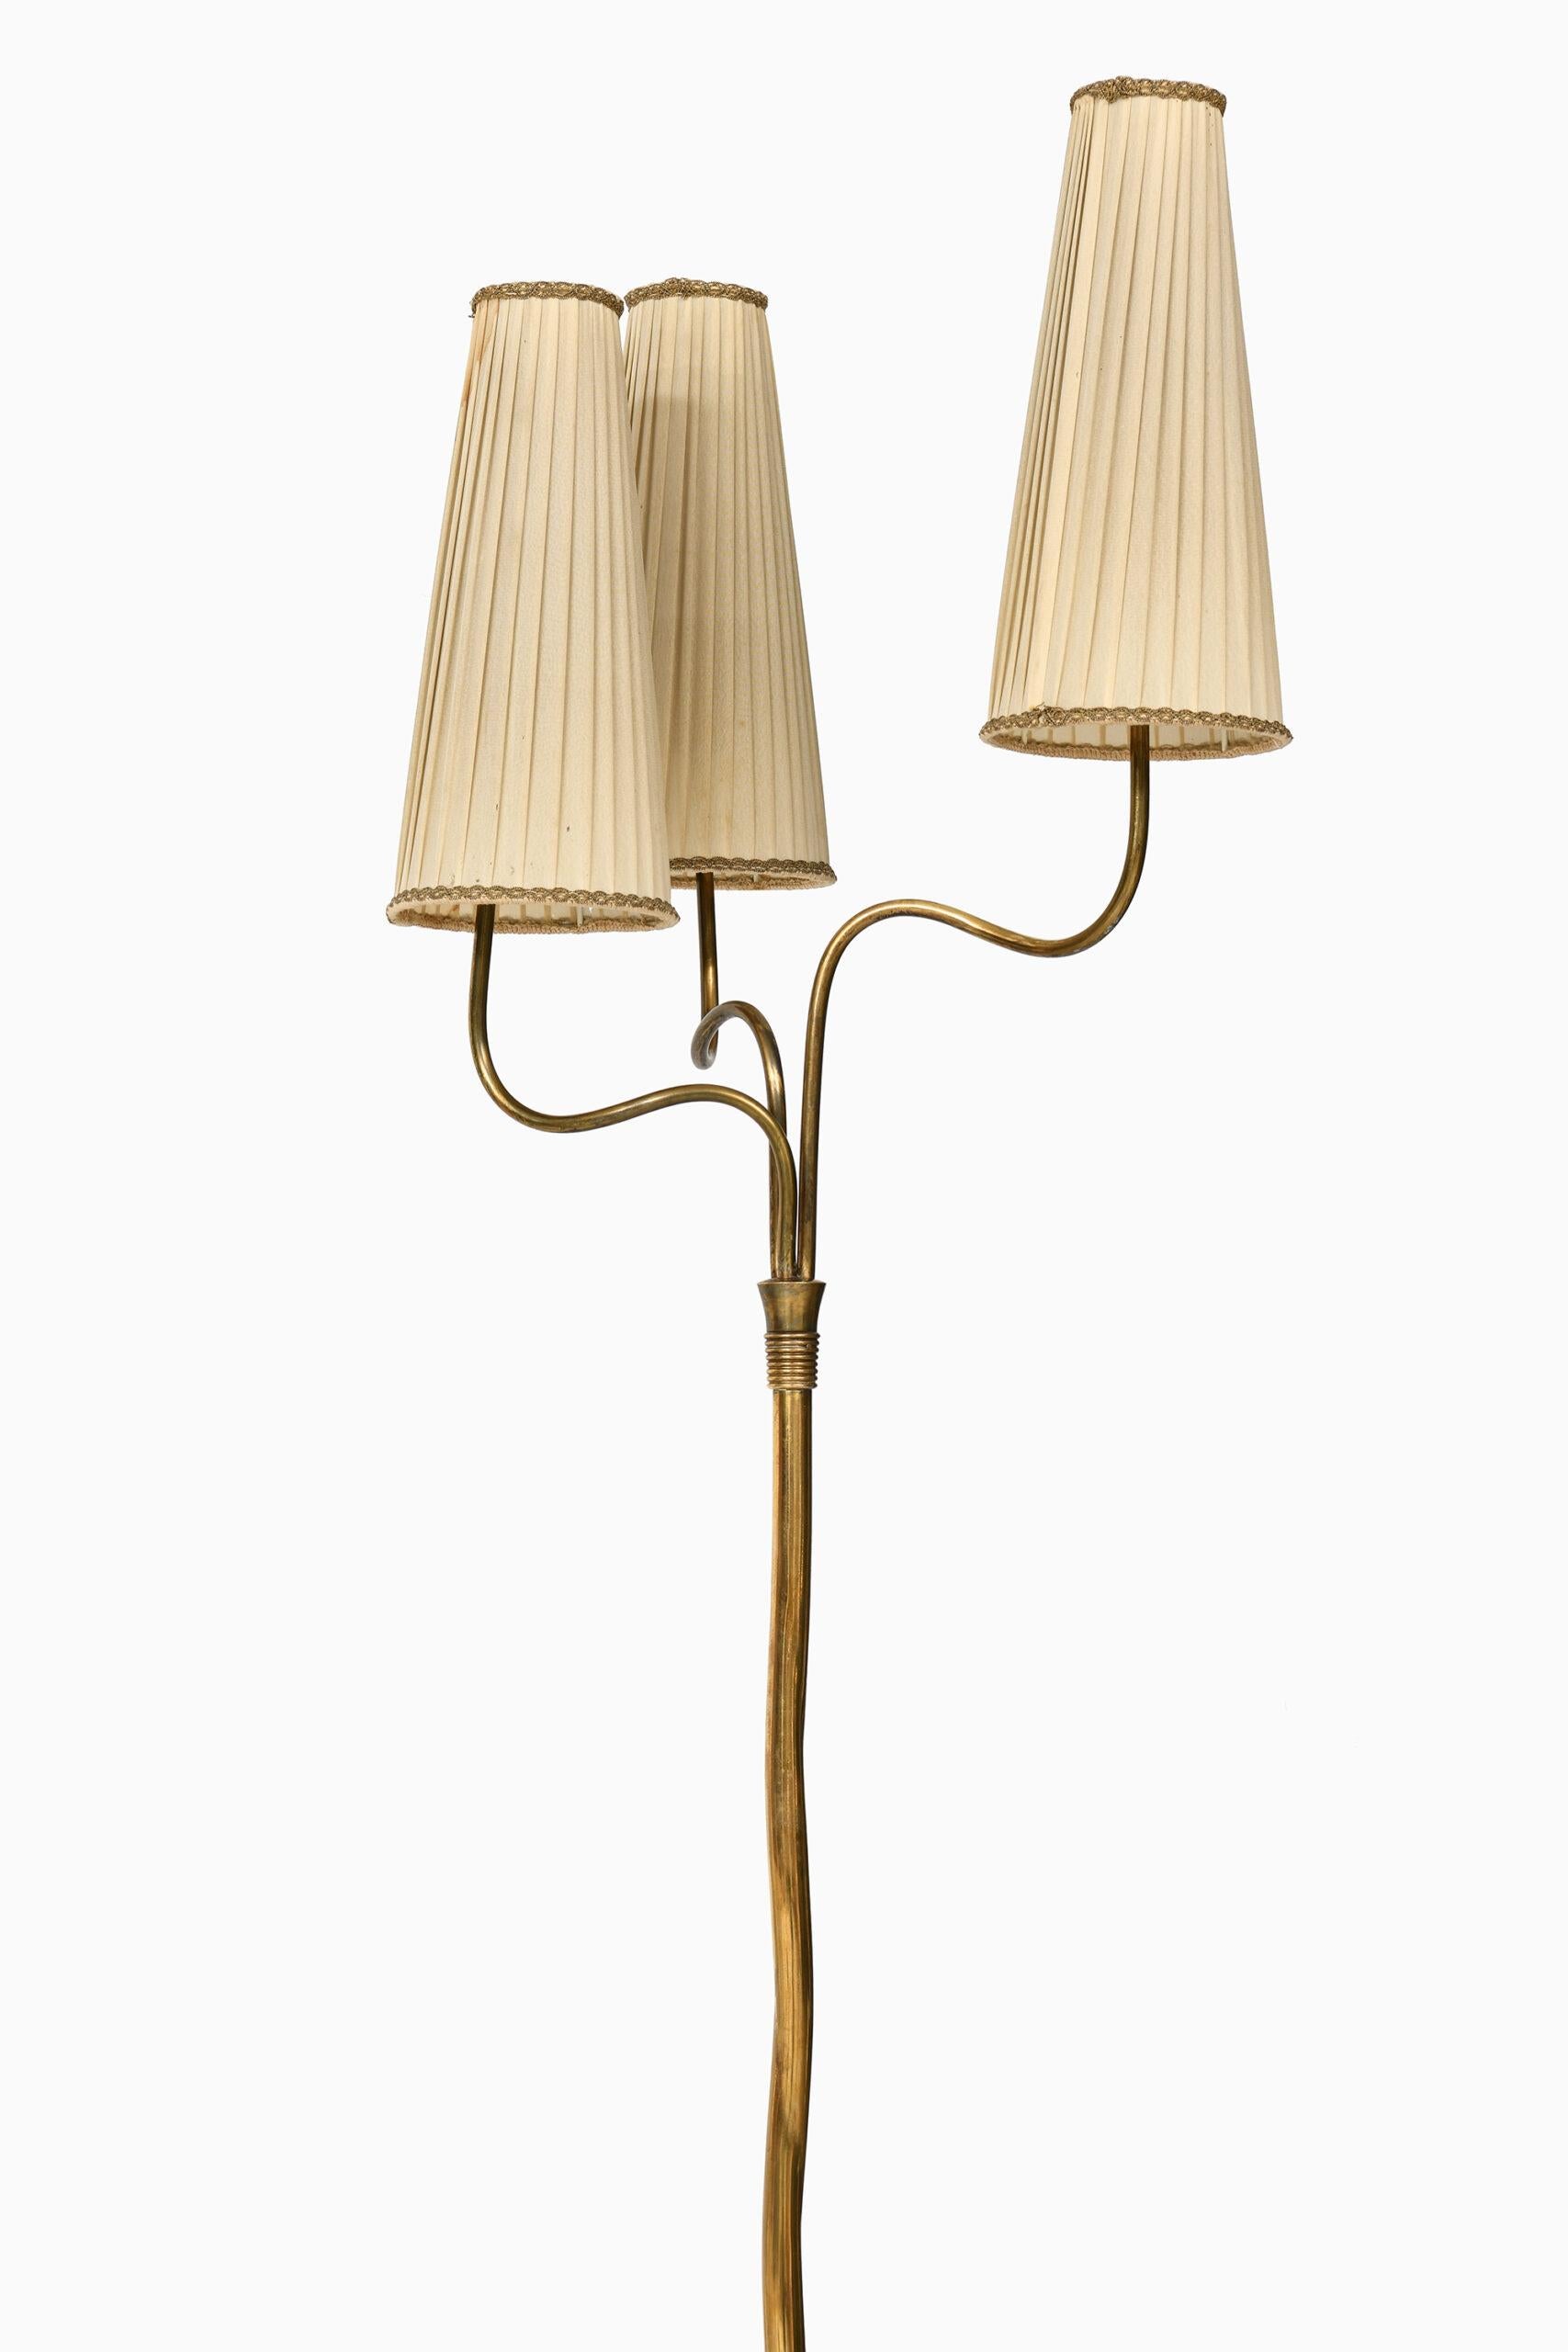 Rare floor lamp by unknown designer. Produced by Itsu in Finland.